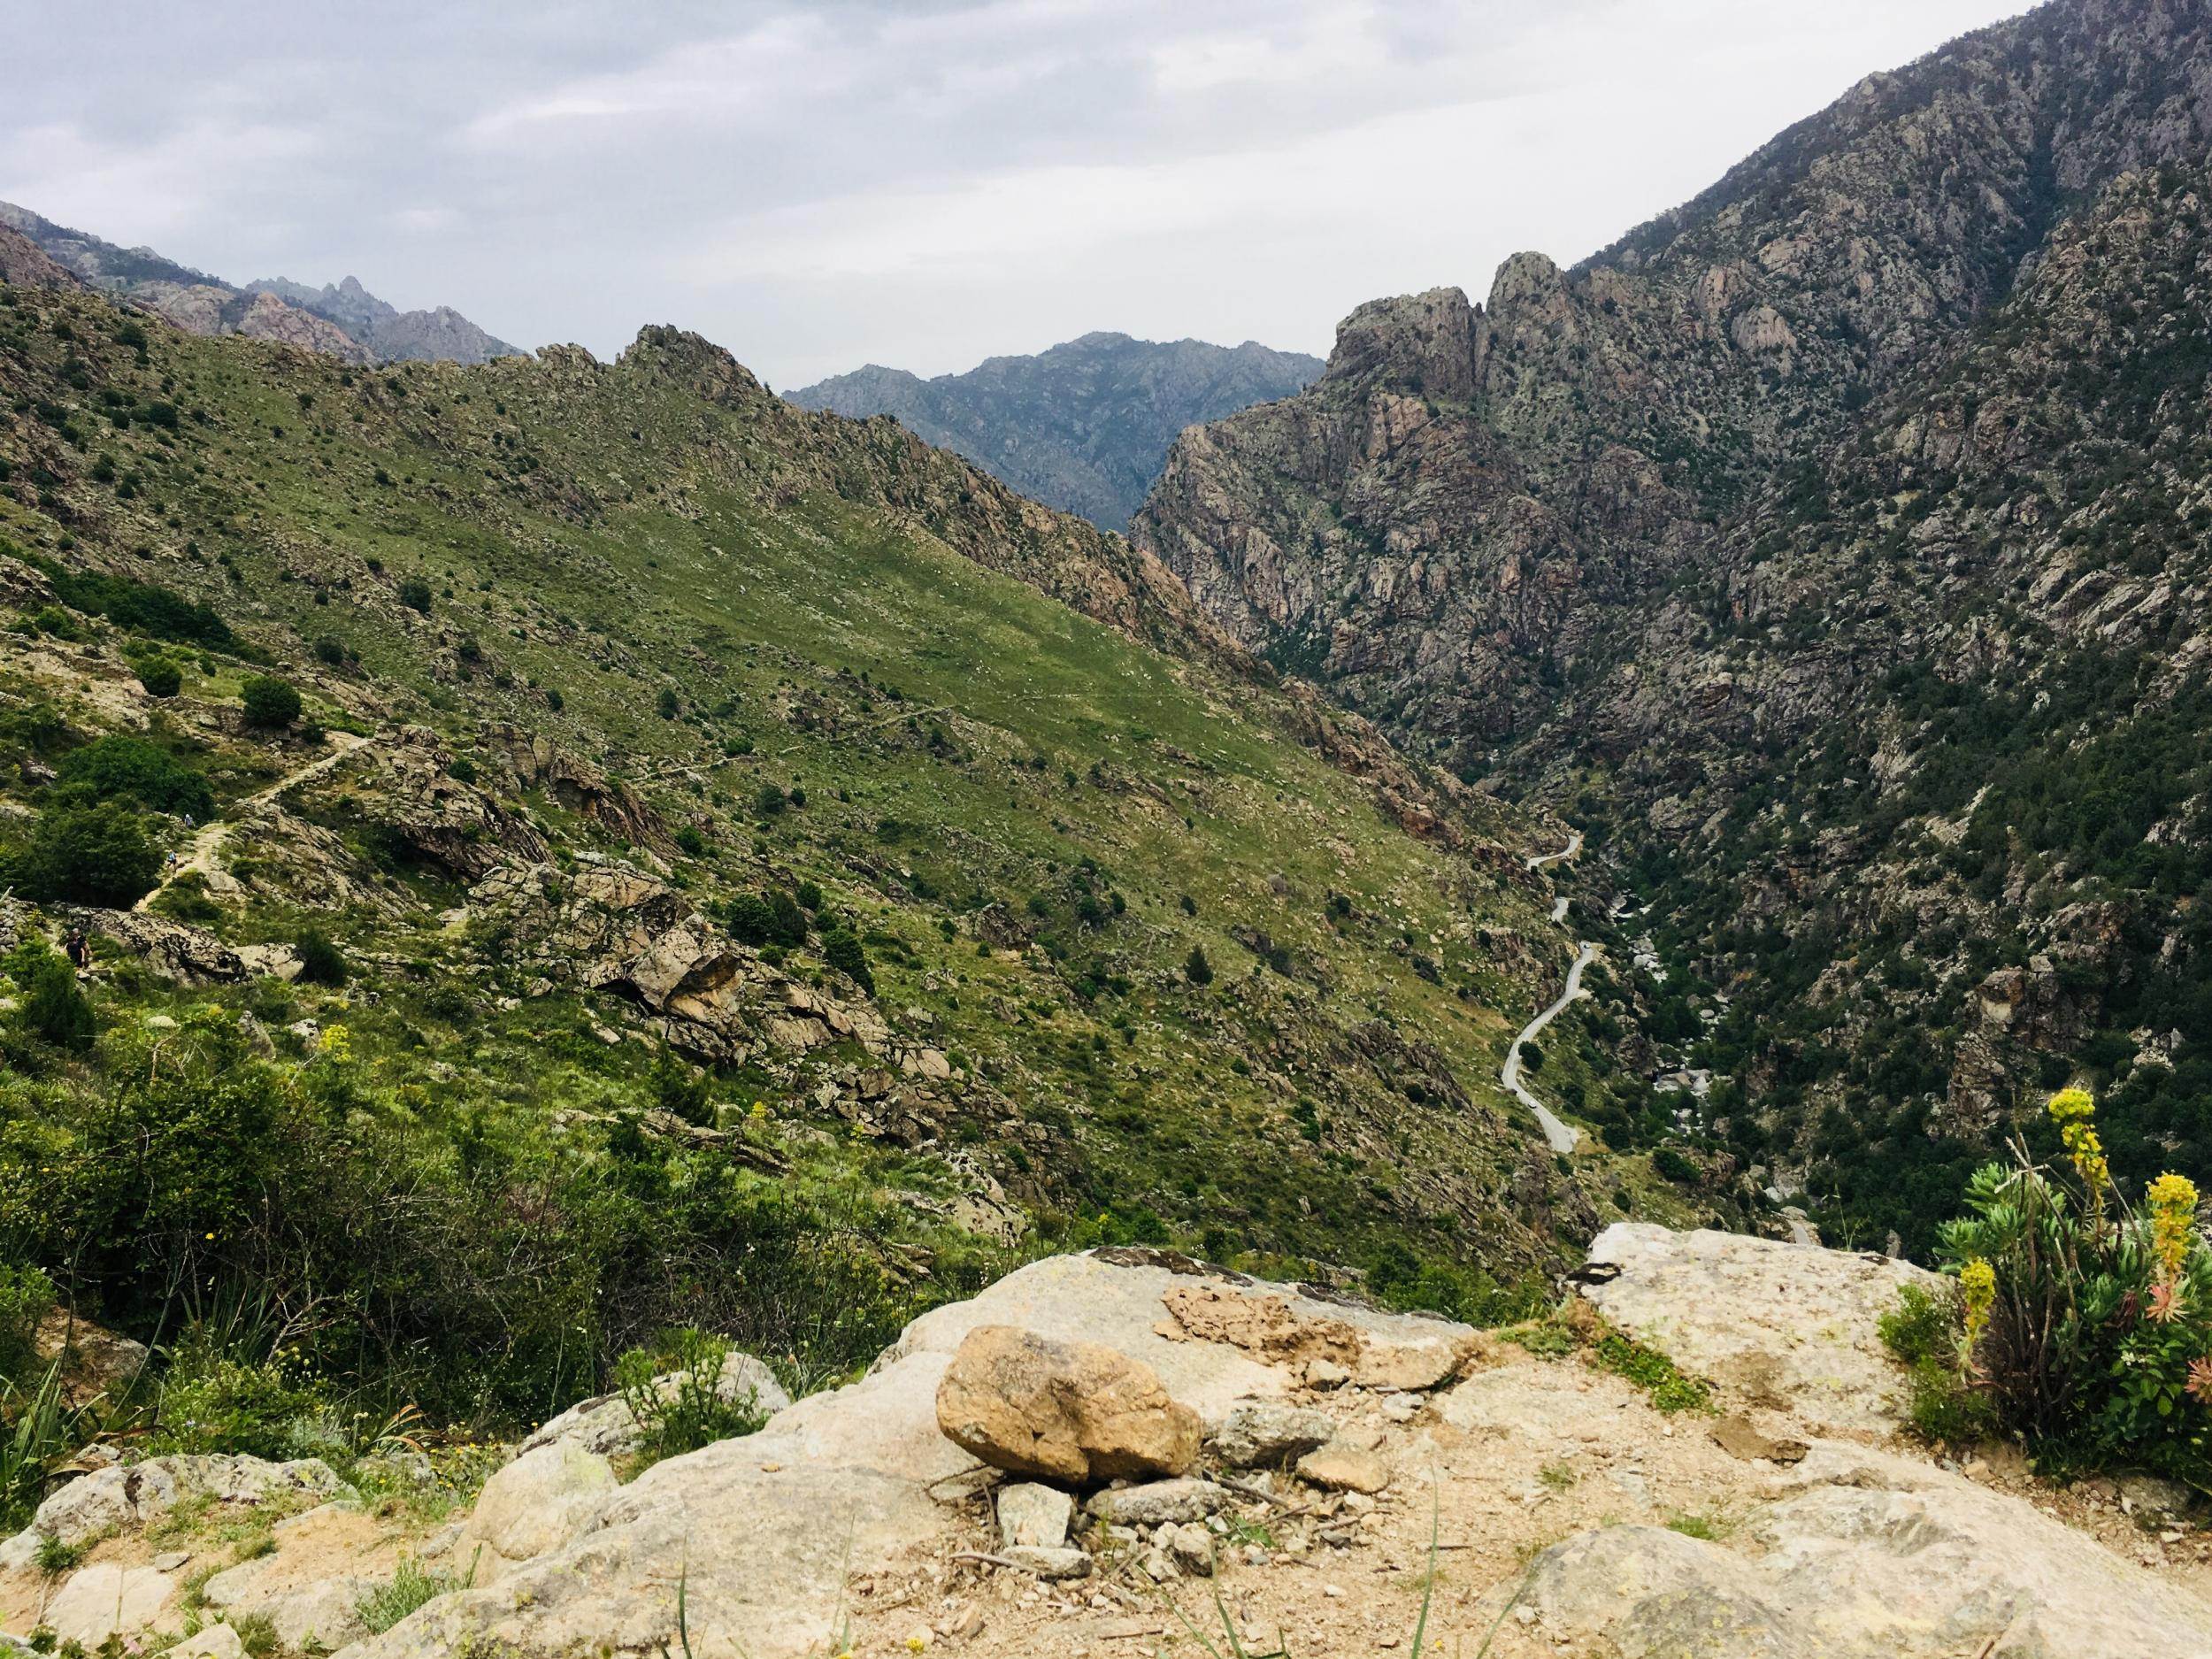 Corsica’s rocky mountains and ravines make for a high-octane walking holiday